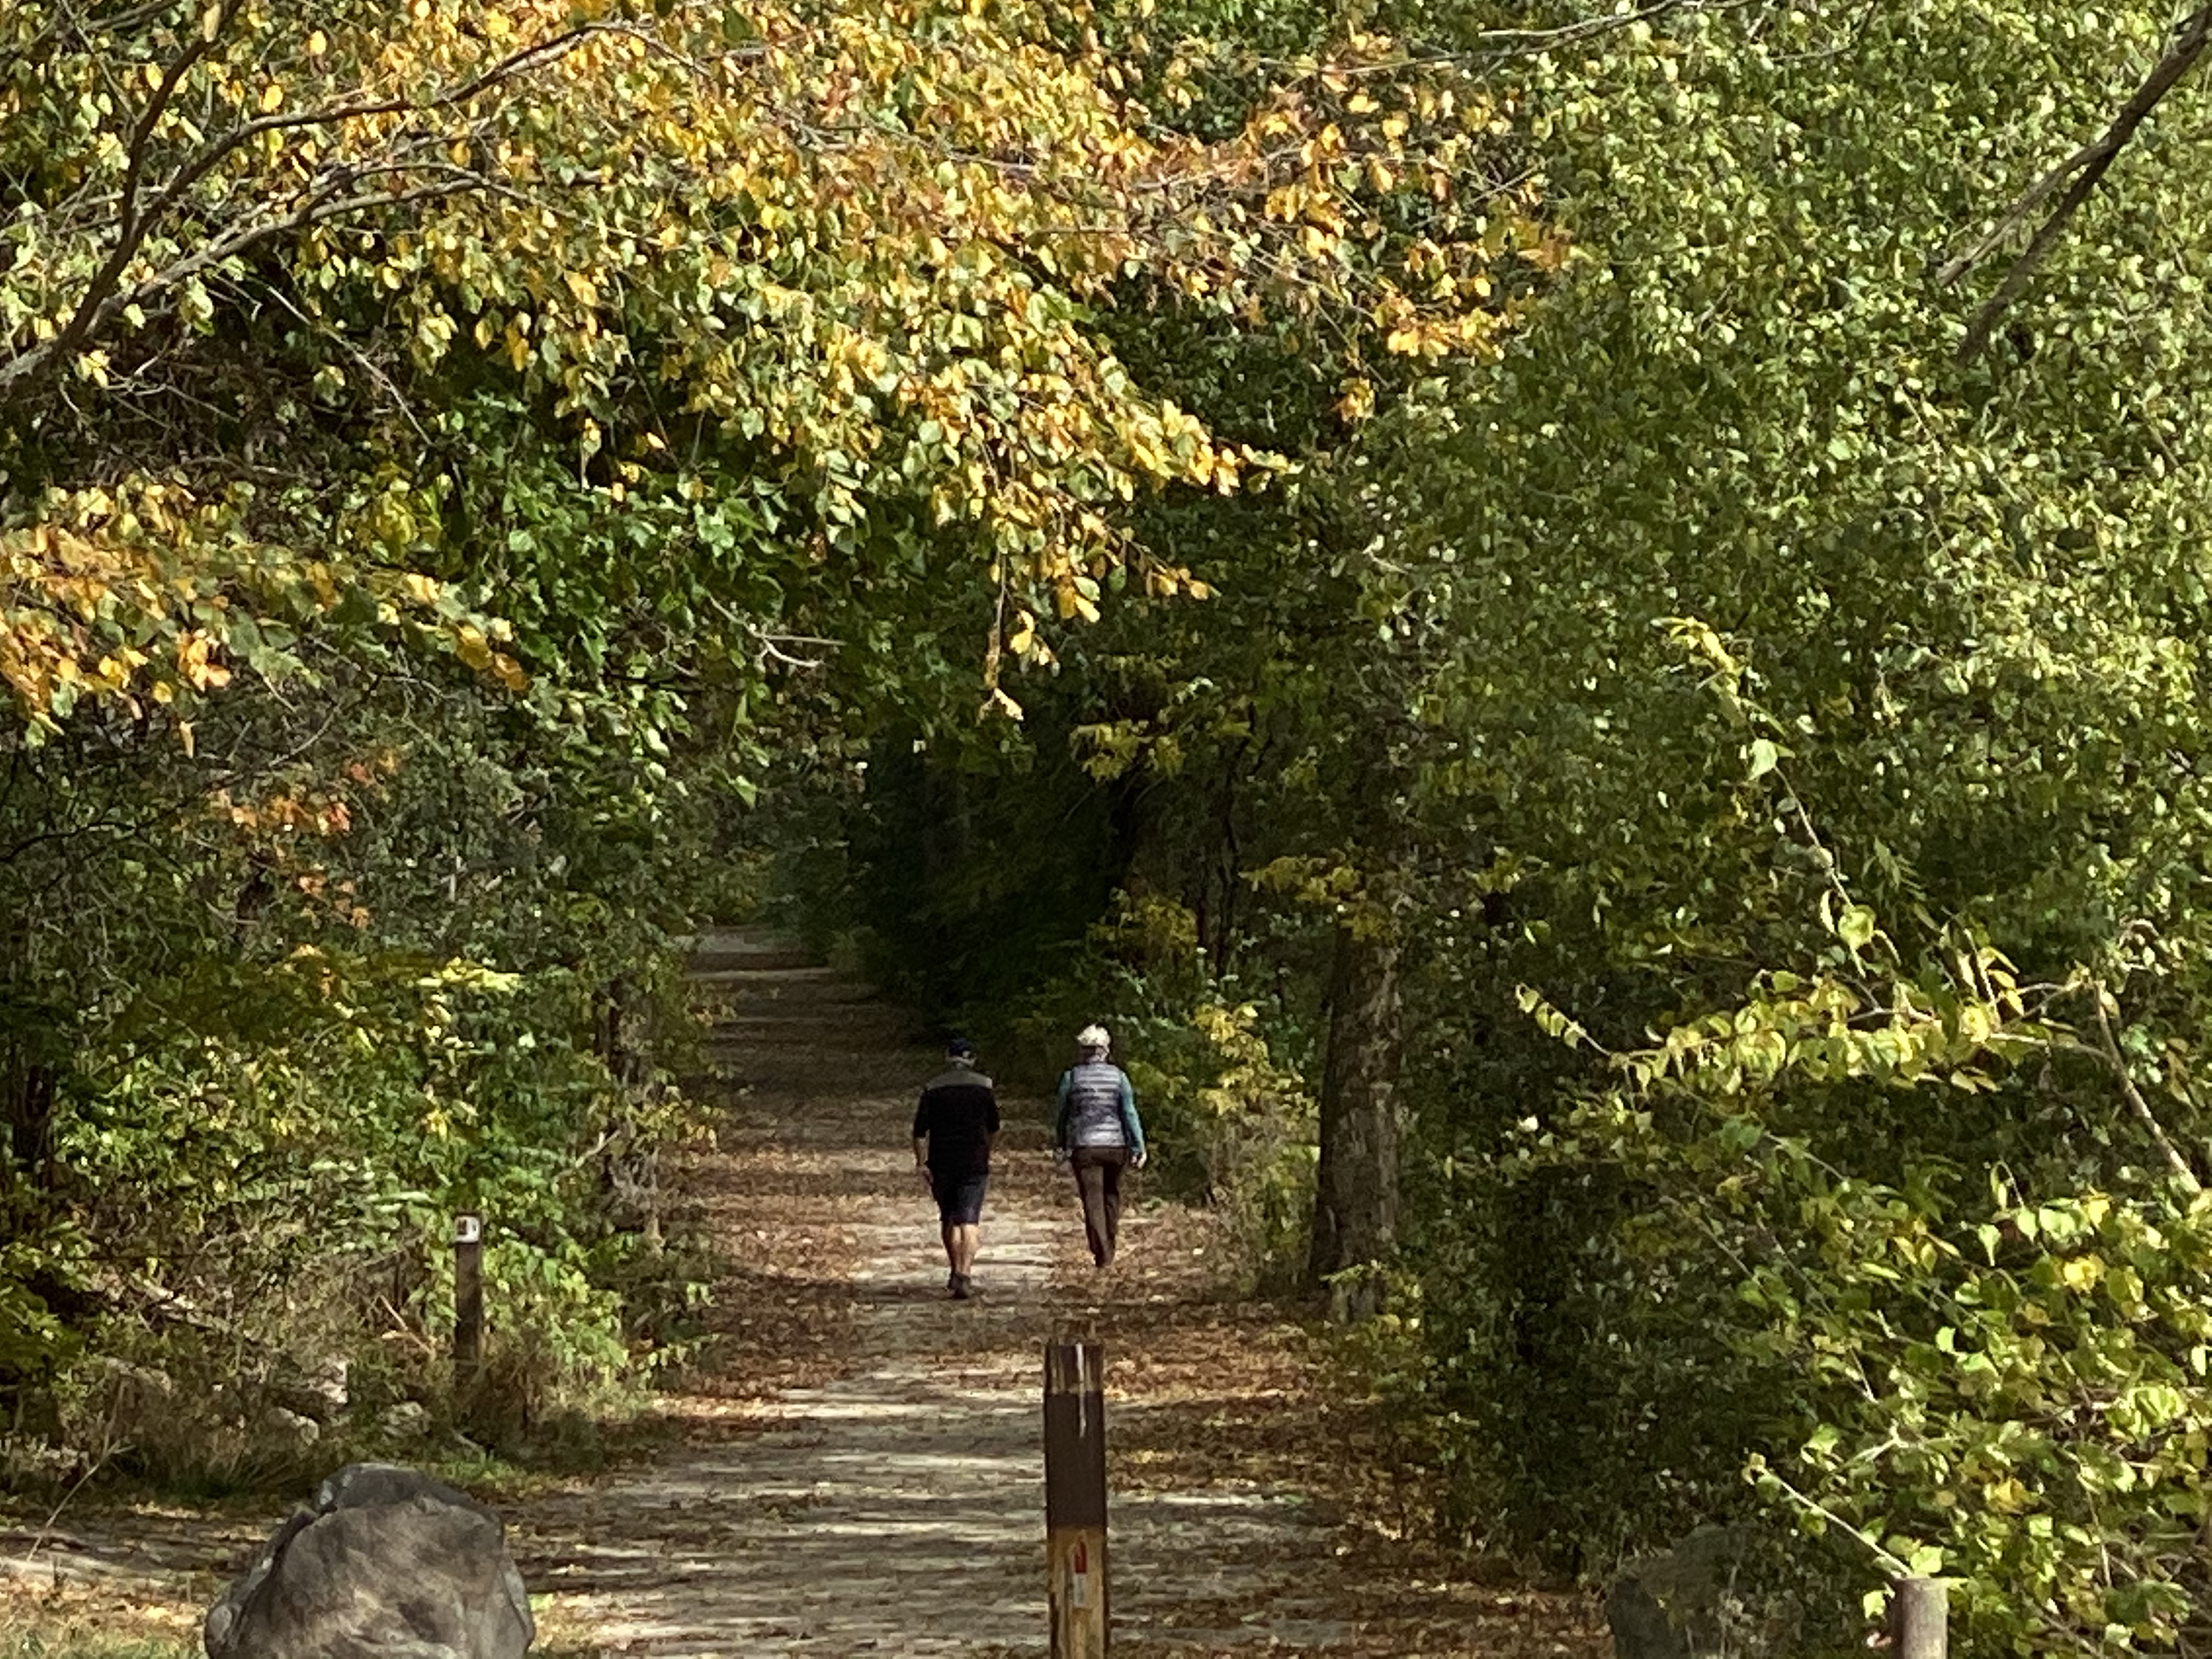 Hiking on a path at the Heritage Quarries Recreation Areas